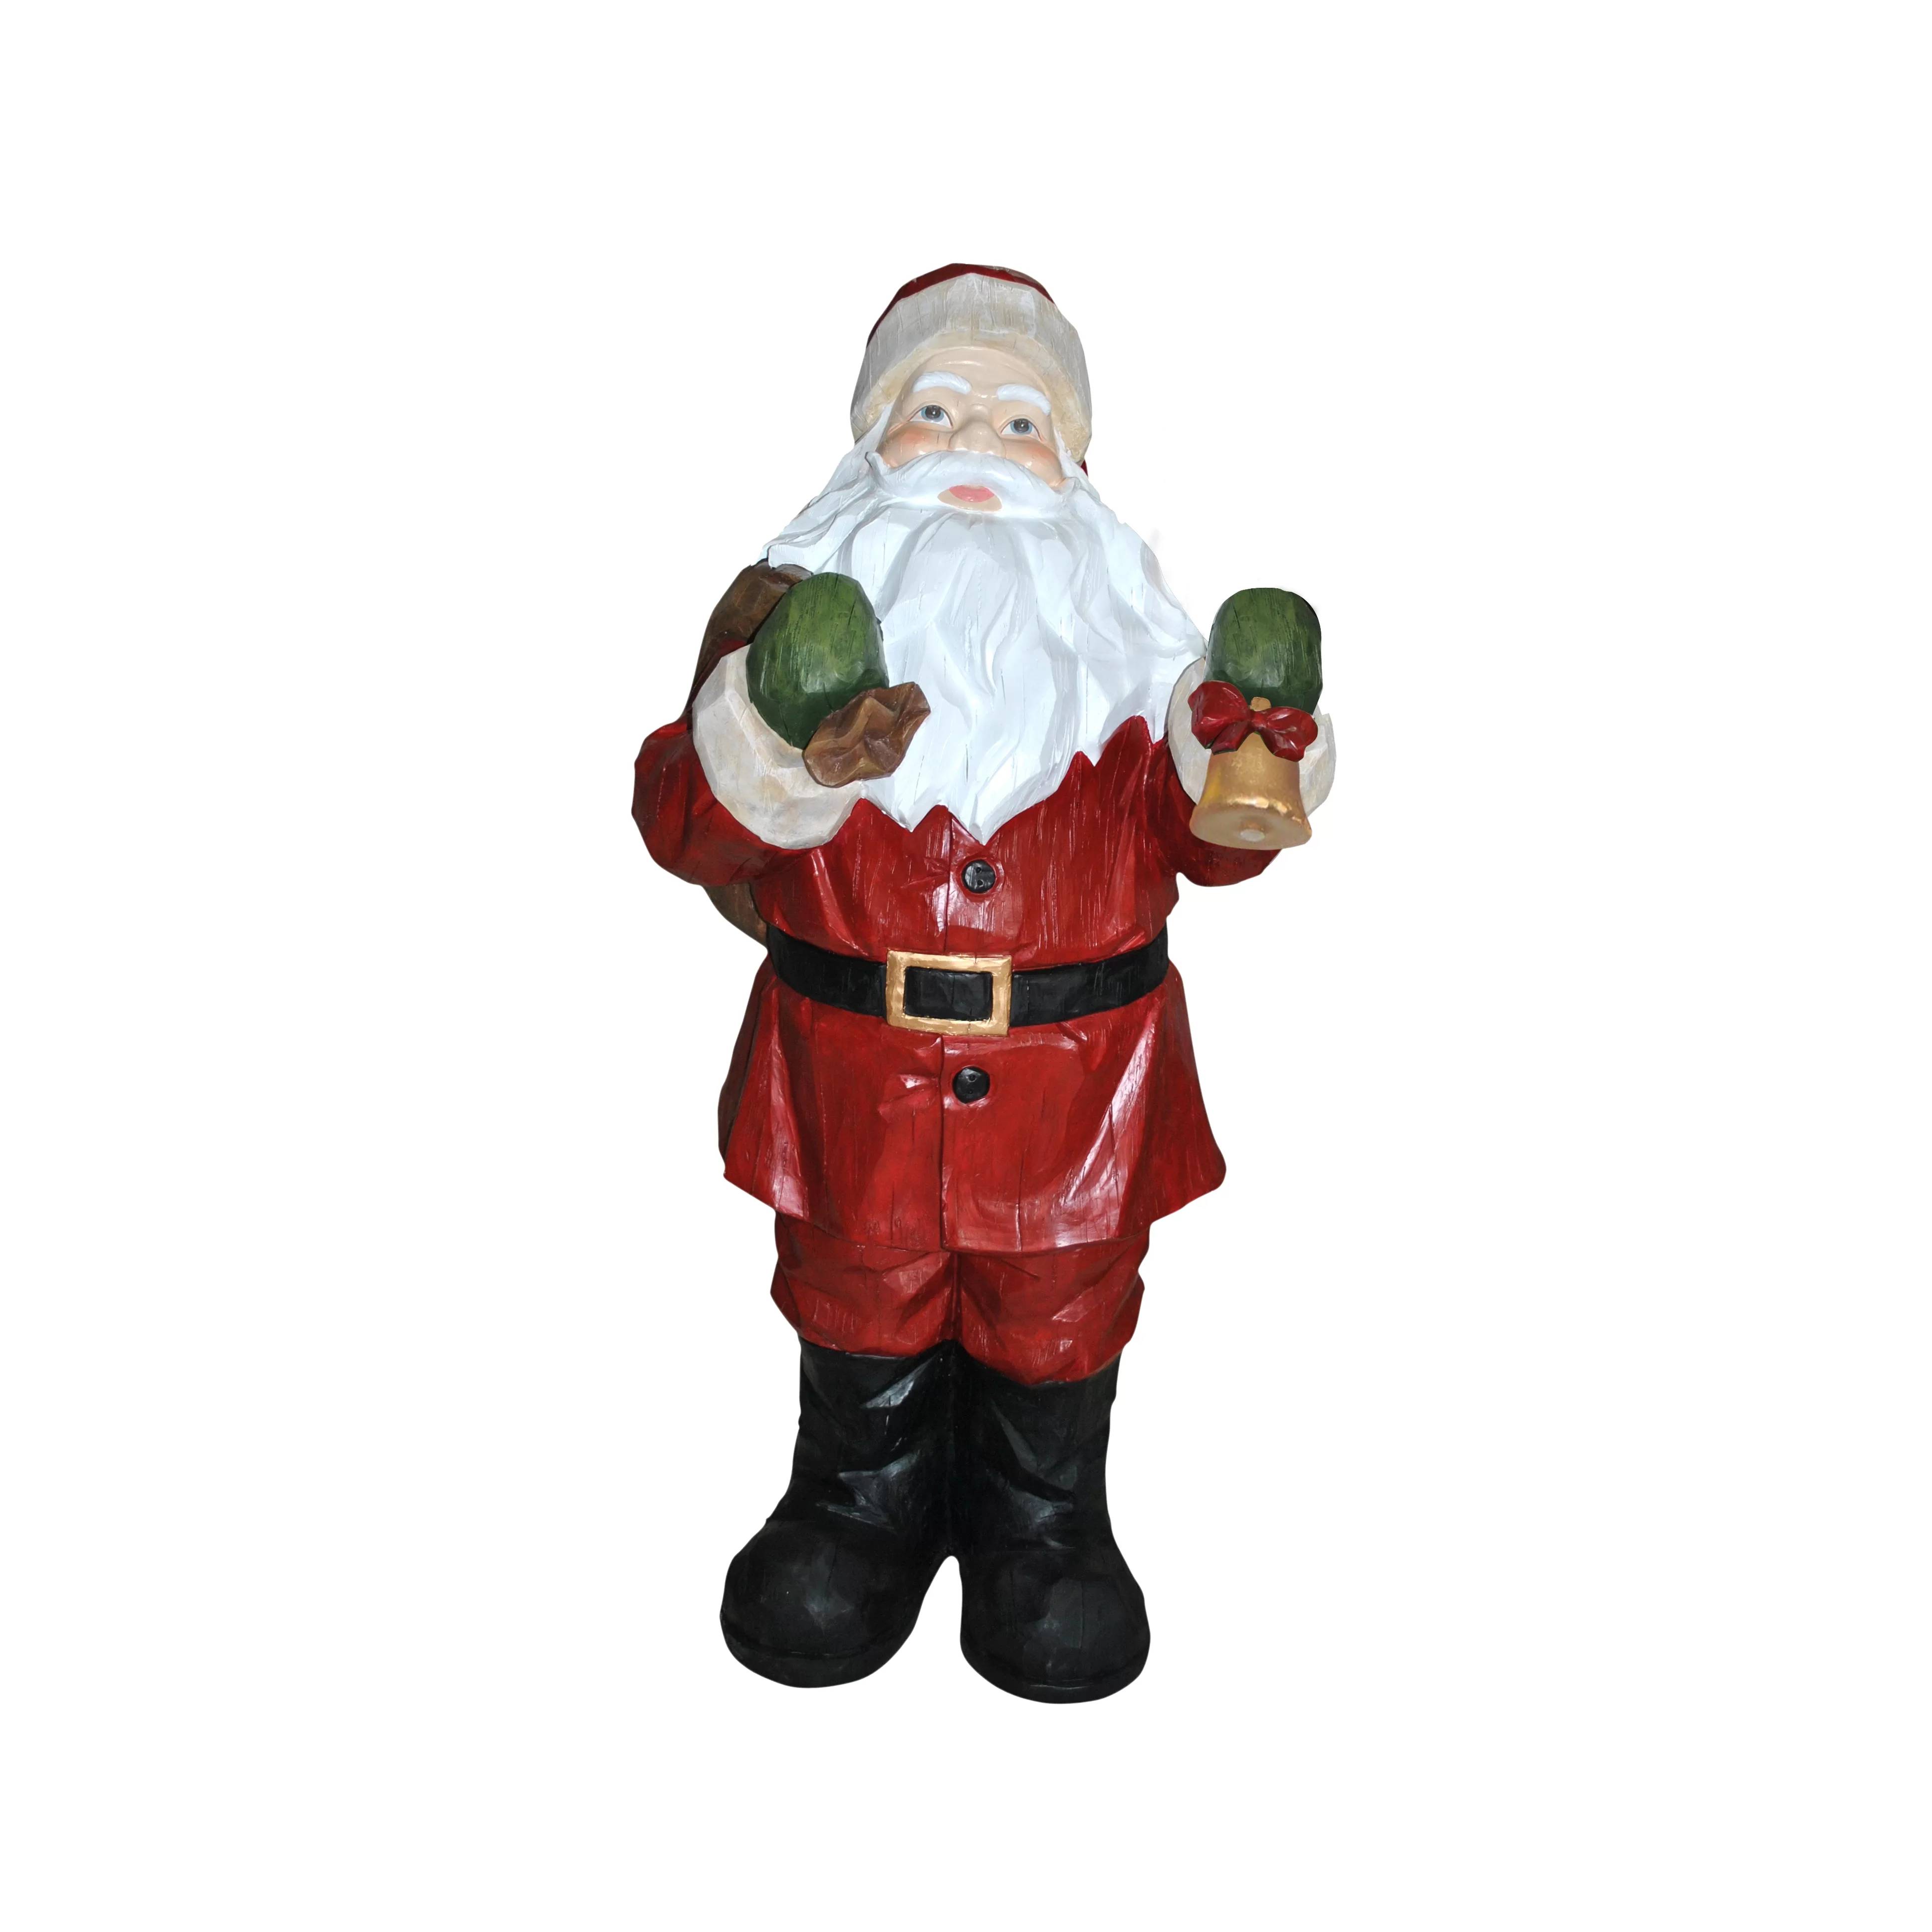 Resin material sculpture Christmas decoration life-size outdoor santa statue on sale